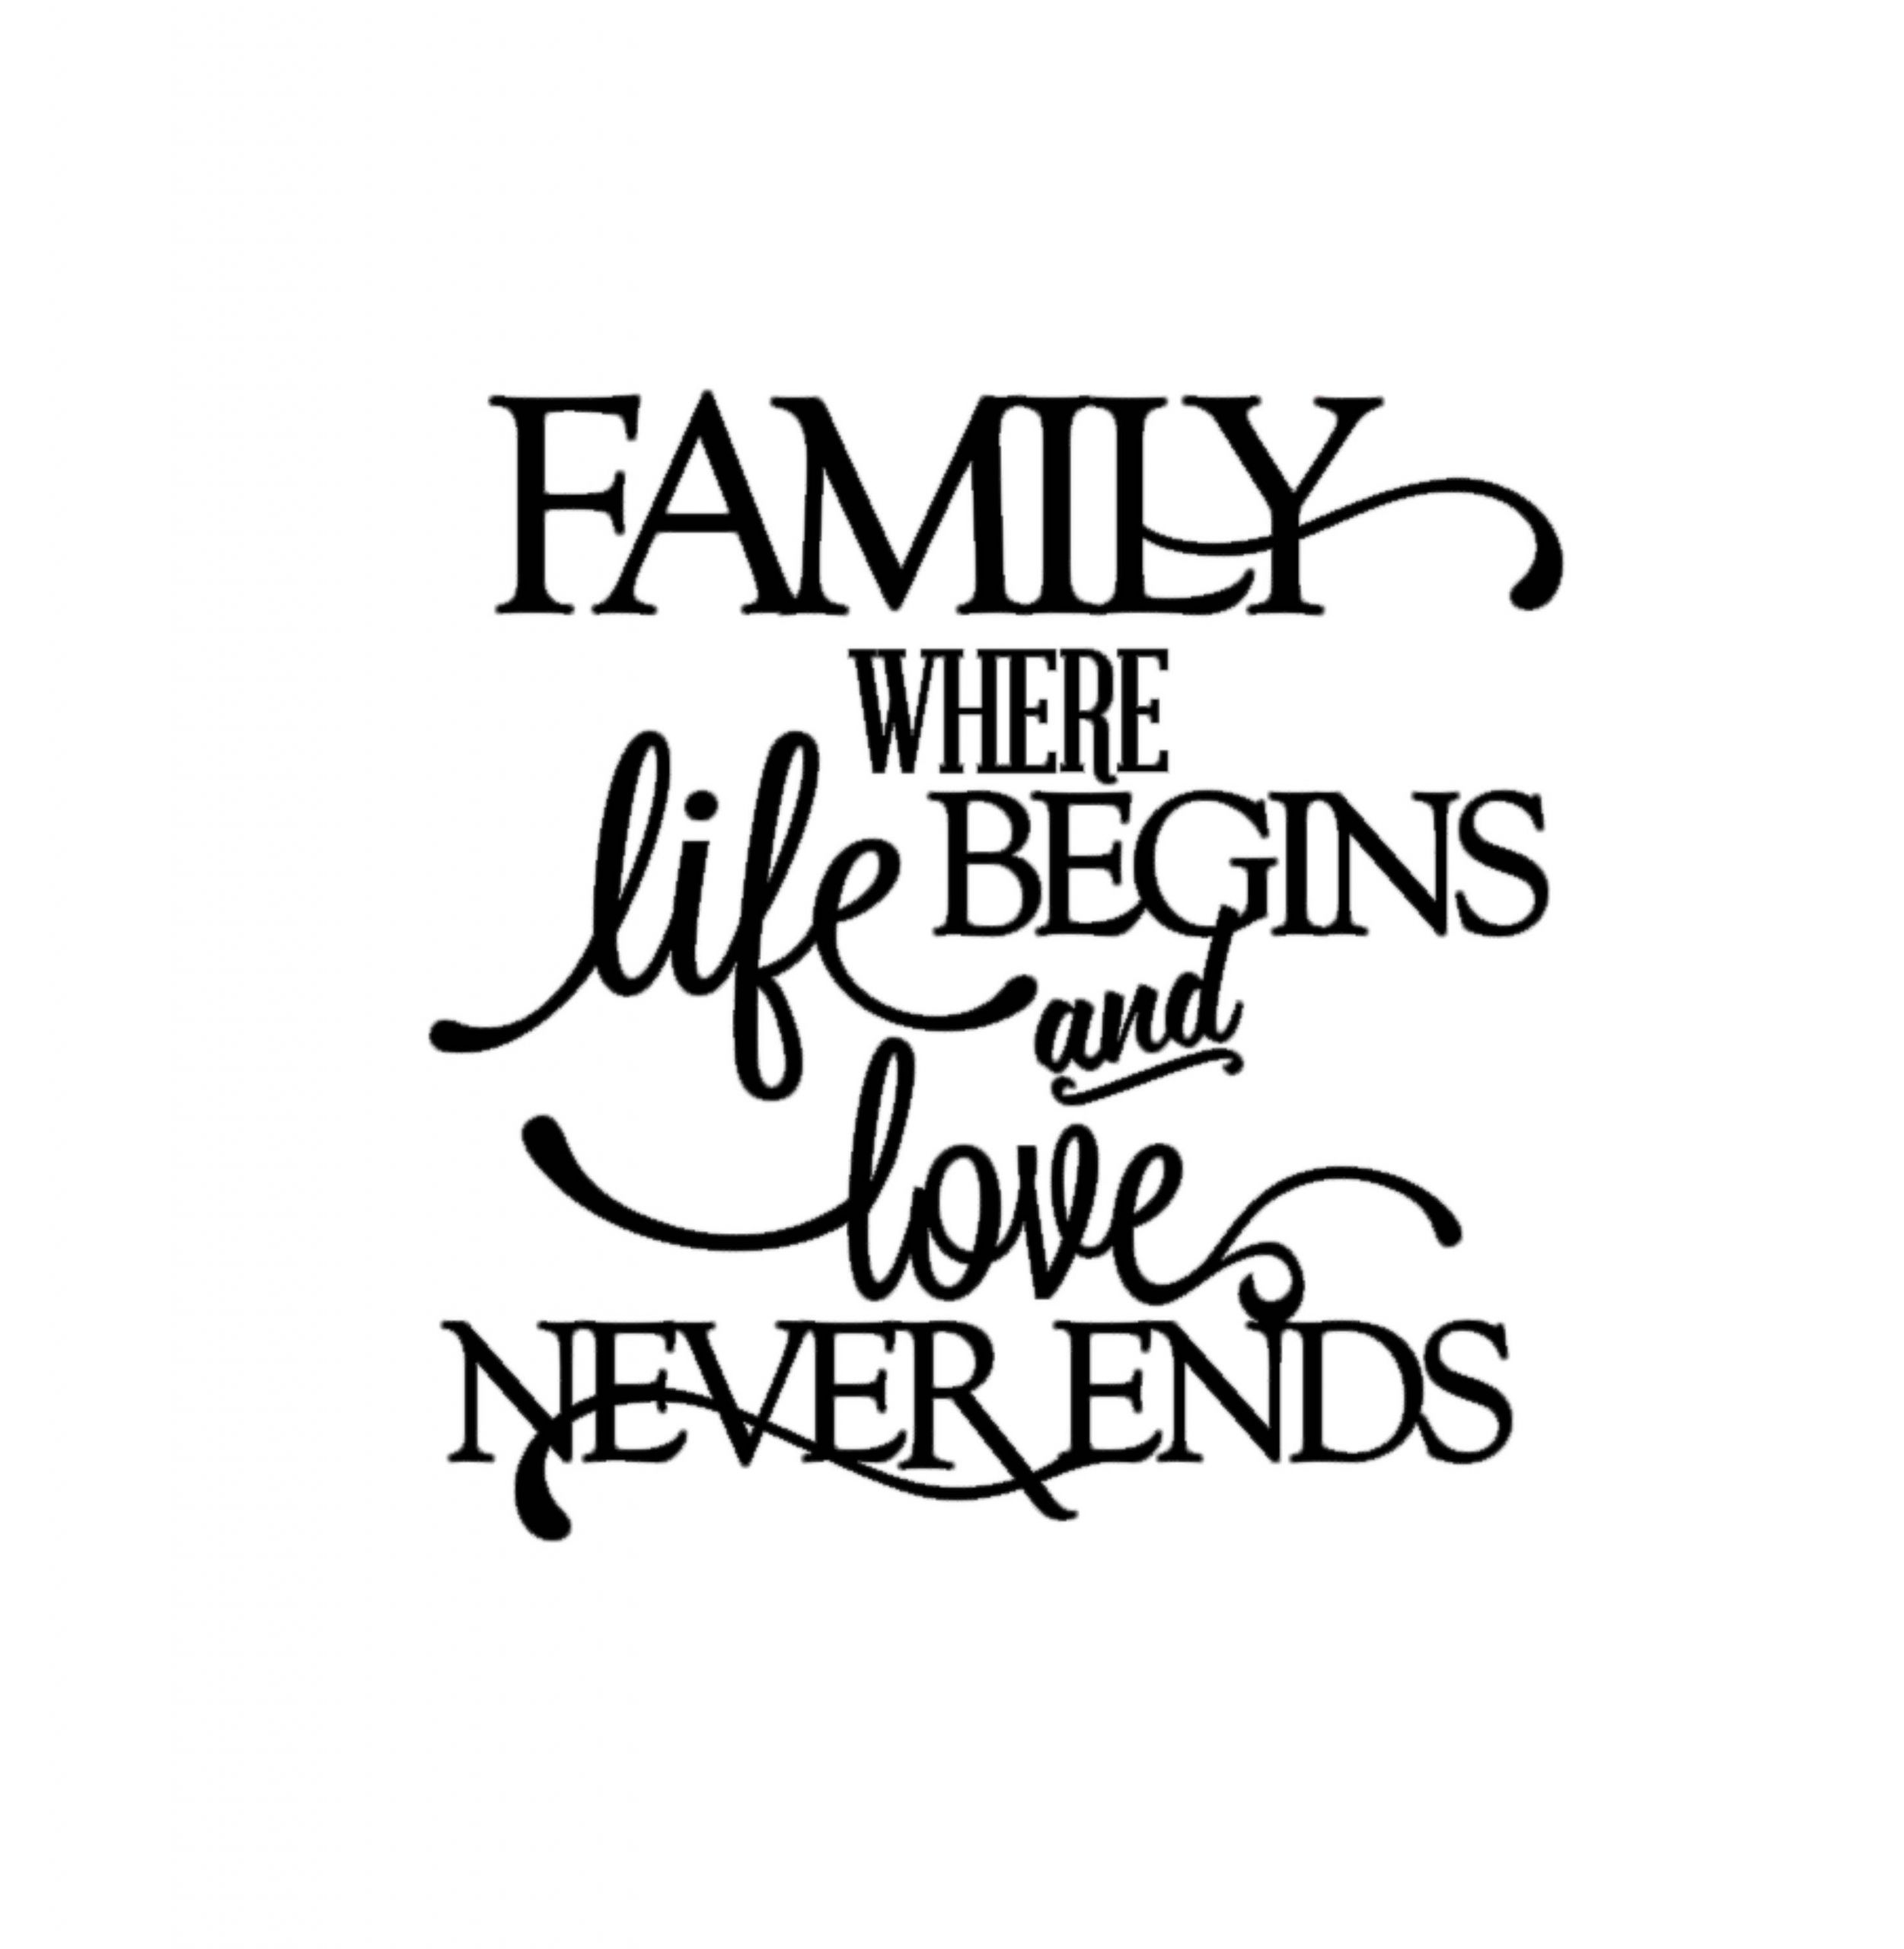 Love And Family Quotes
 Family Where Life Begins and Love Never Ends Quote Decal